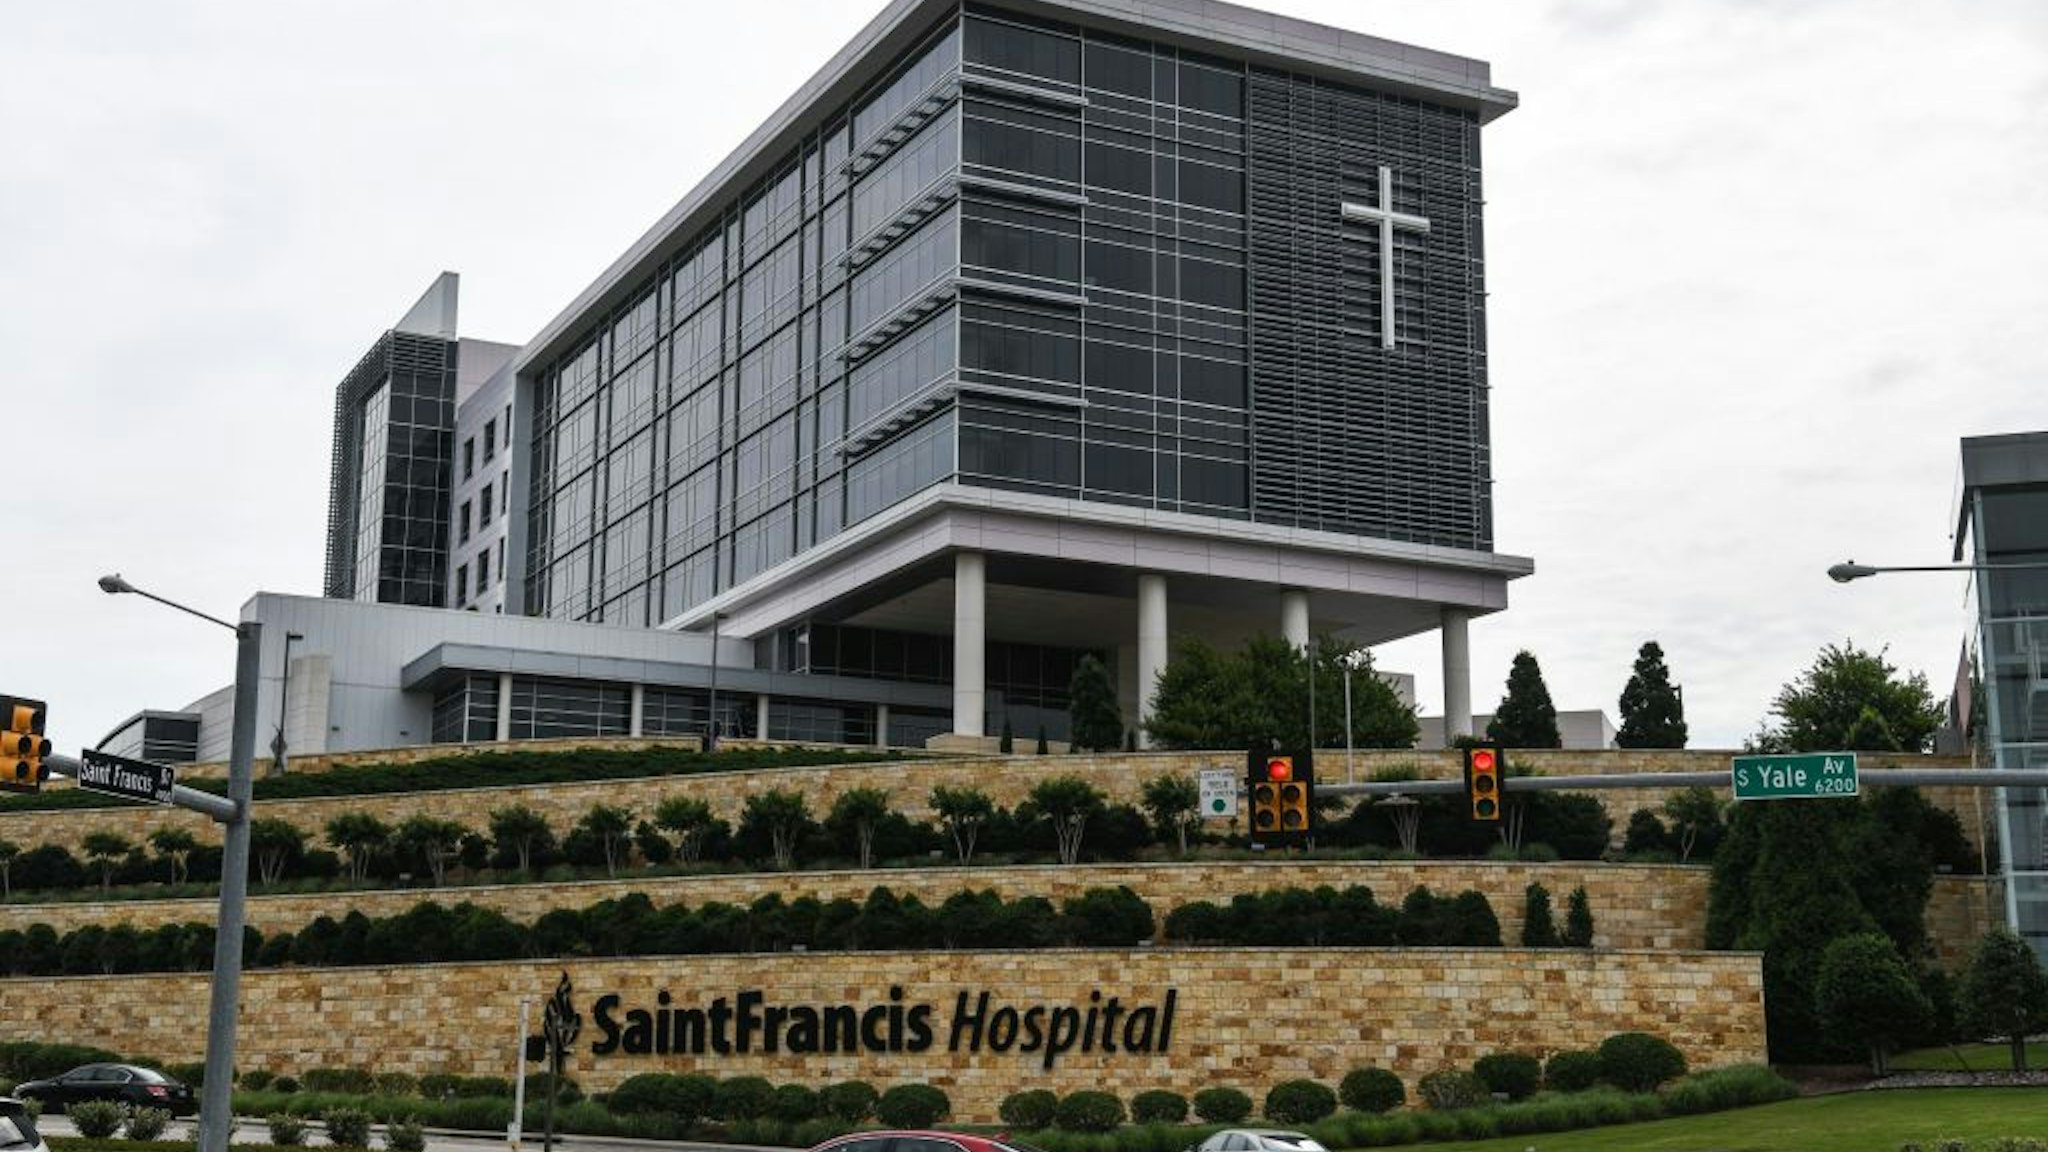 Cars drive past the Saint Francis Hospital campus in Tulsa, Oklahoma, on June 2, 2022. - A gunman has killed at least four people at the hospital, police said -- the latest in a string of mass shootings across the US in recent weeks.